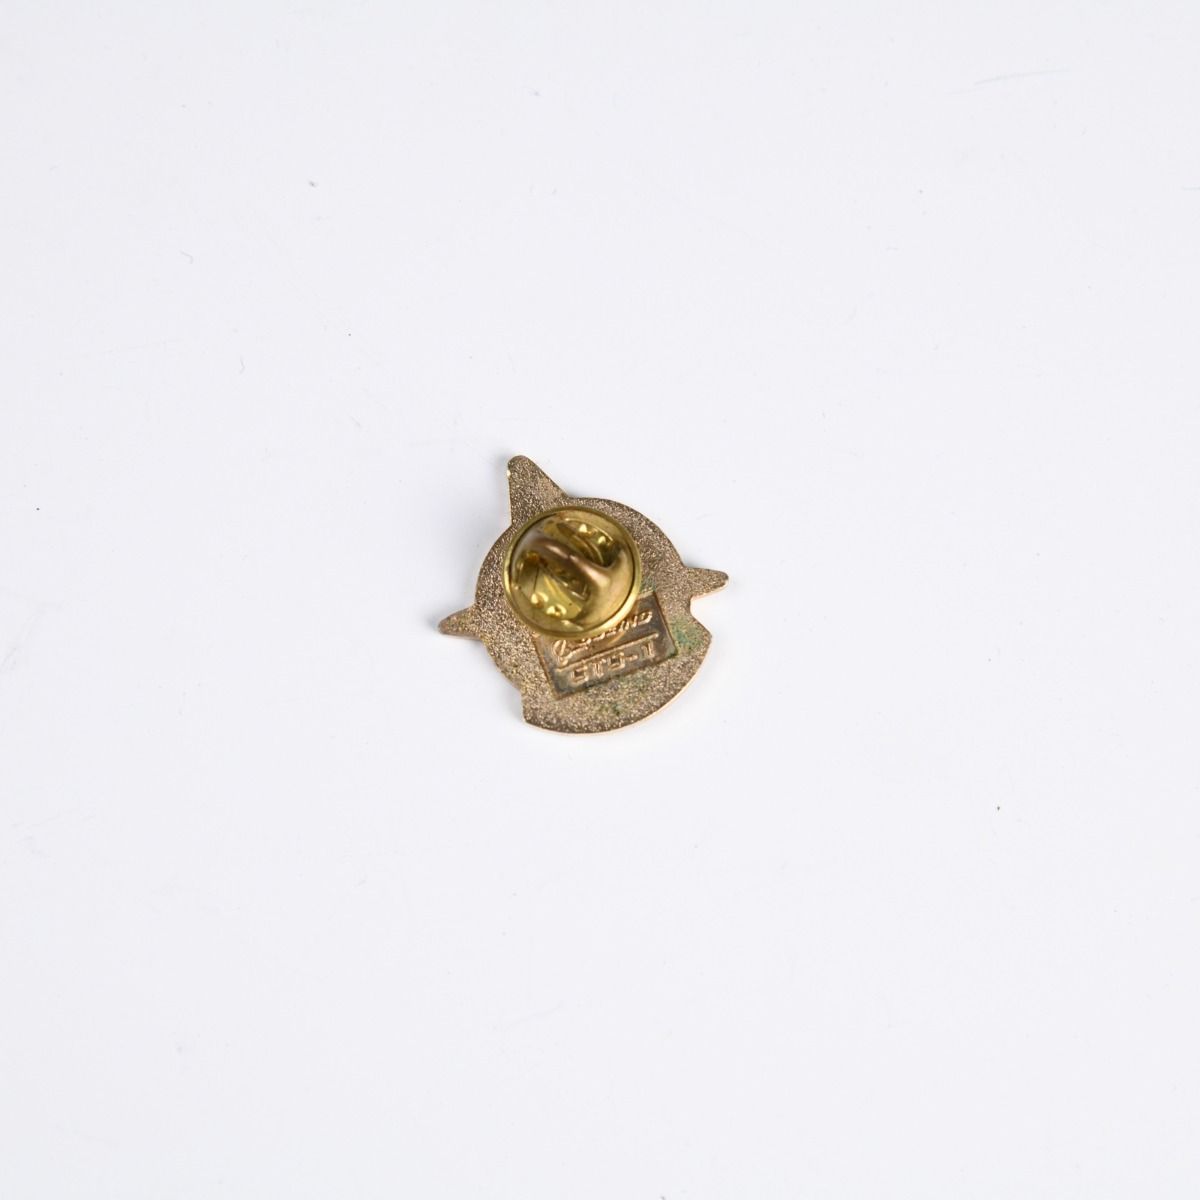 Columbia Young Crippen Space Shuttle Pin Badge